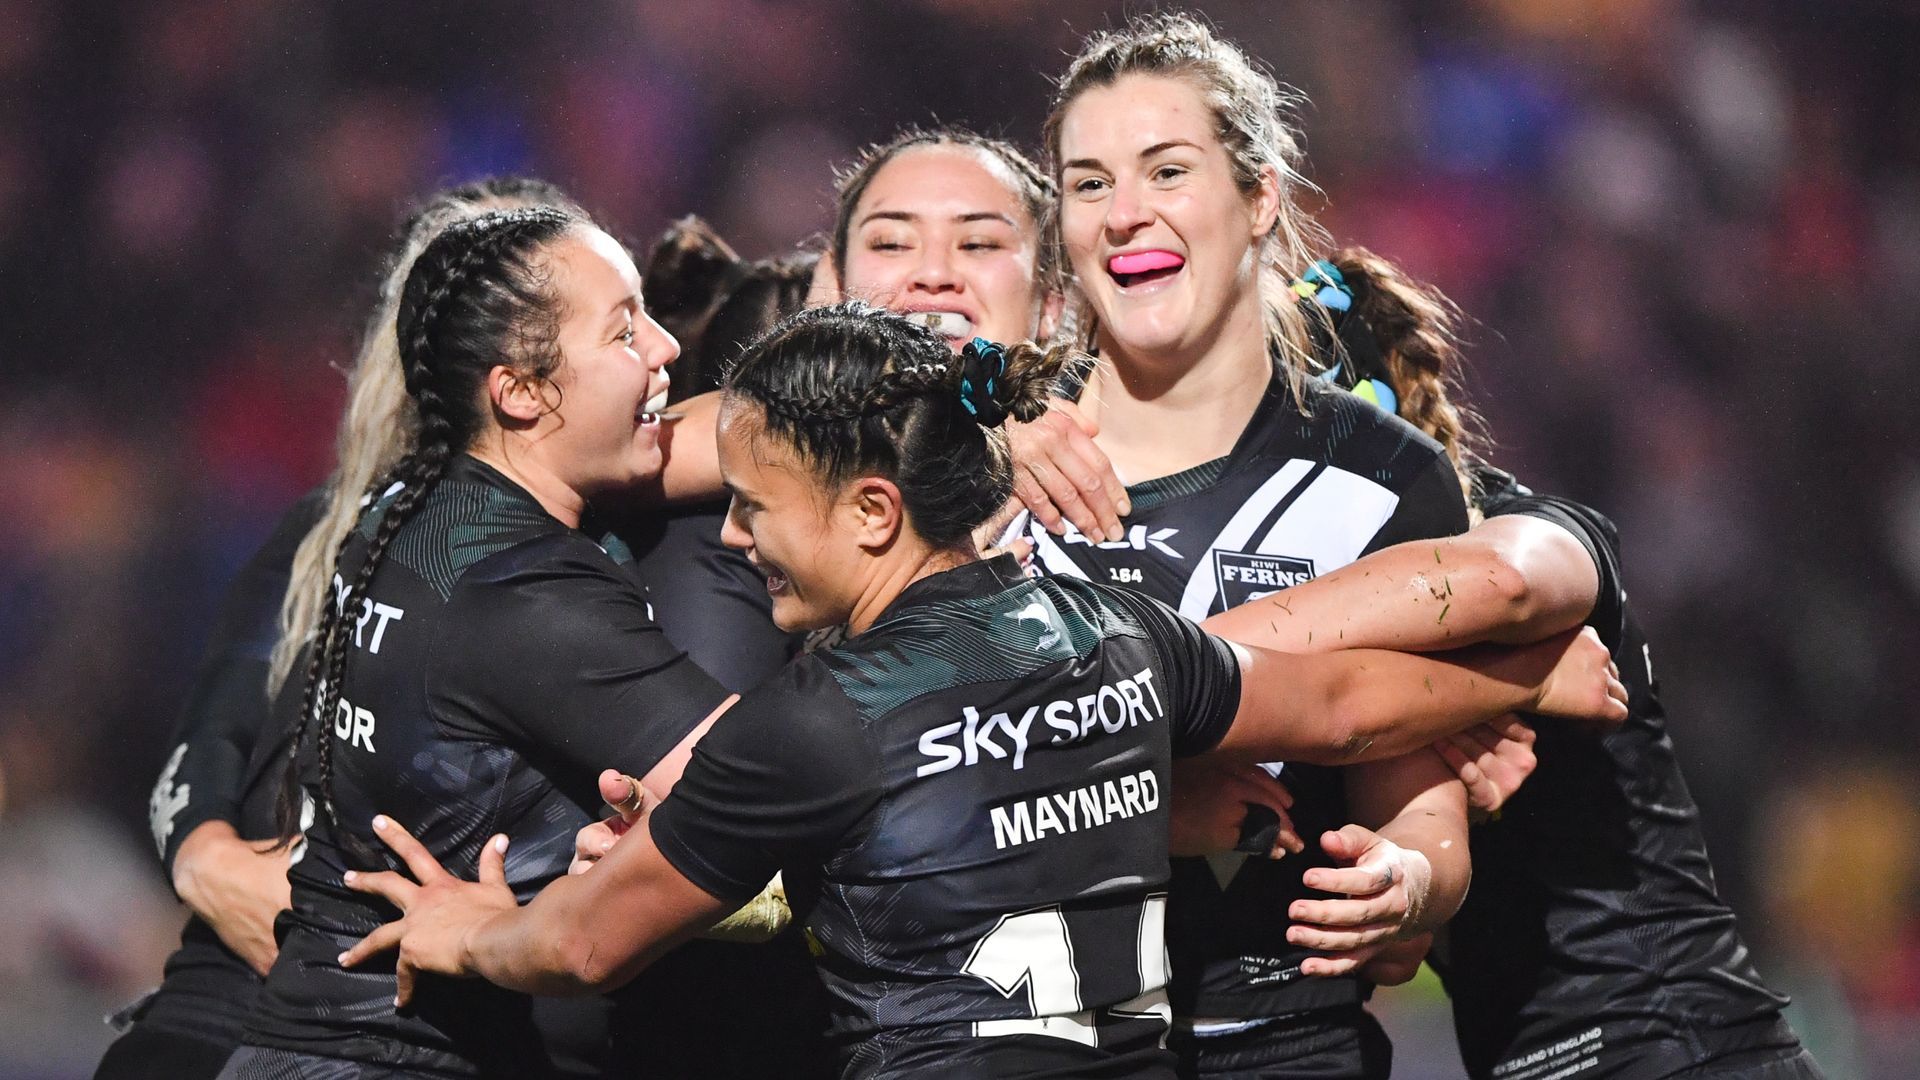 England overwhelmed by New Zealand in Girls’s Rugby League World Cup semisSkySports | Information